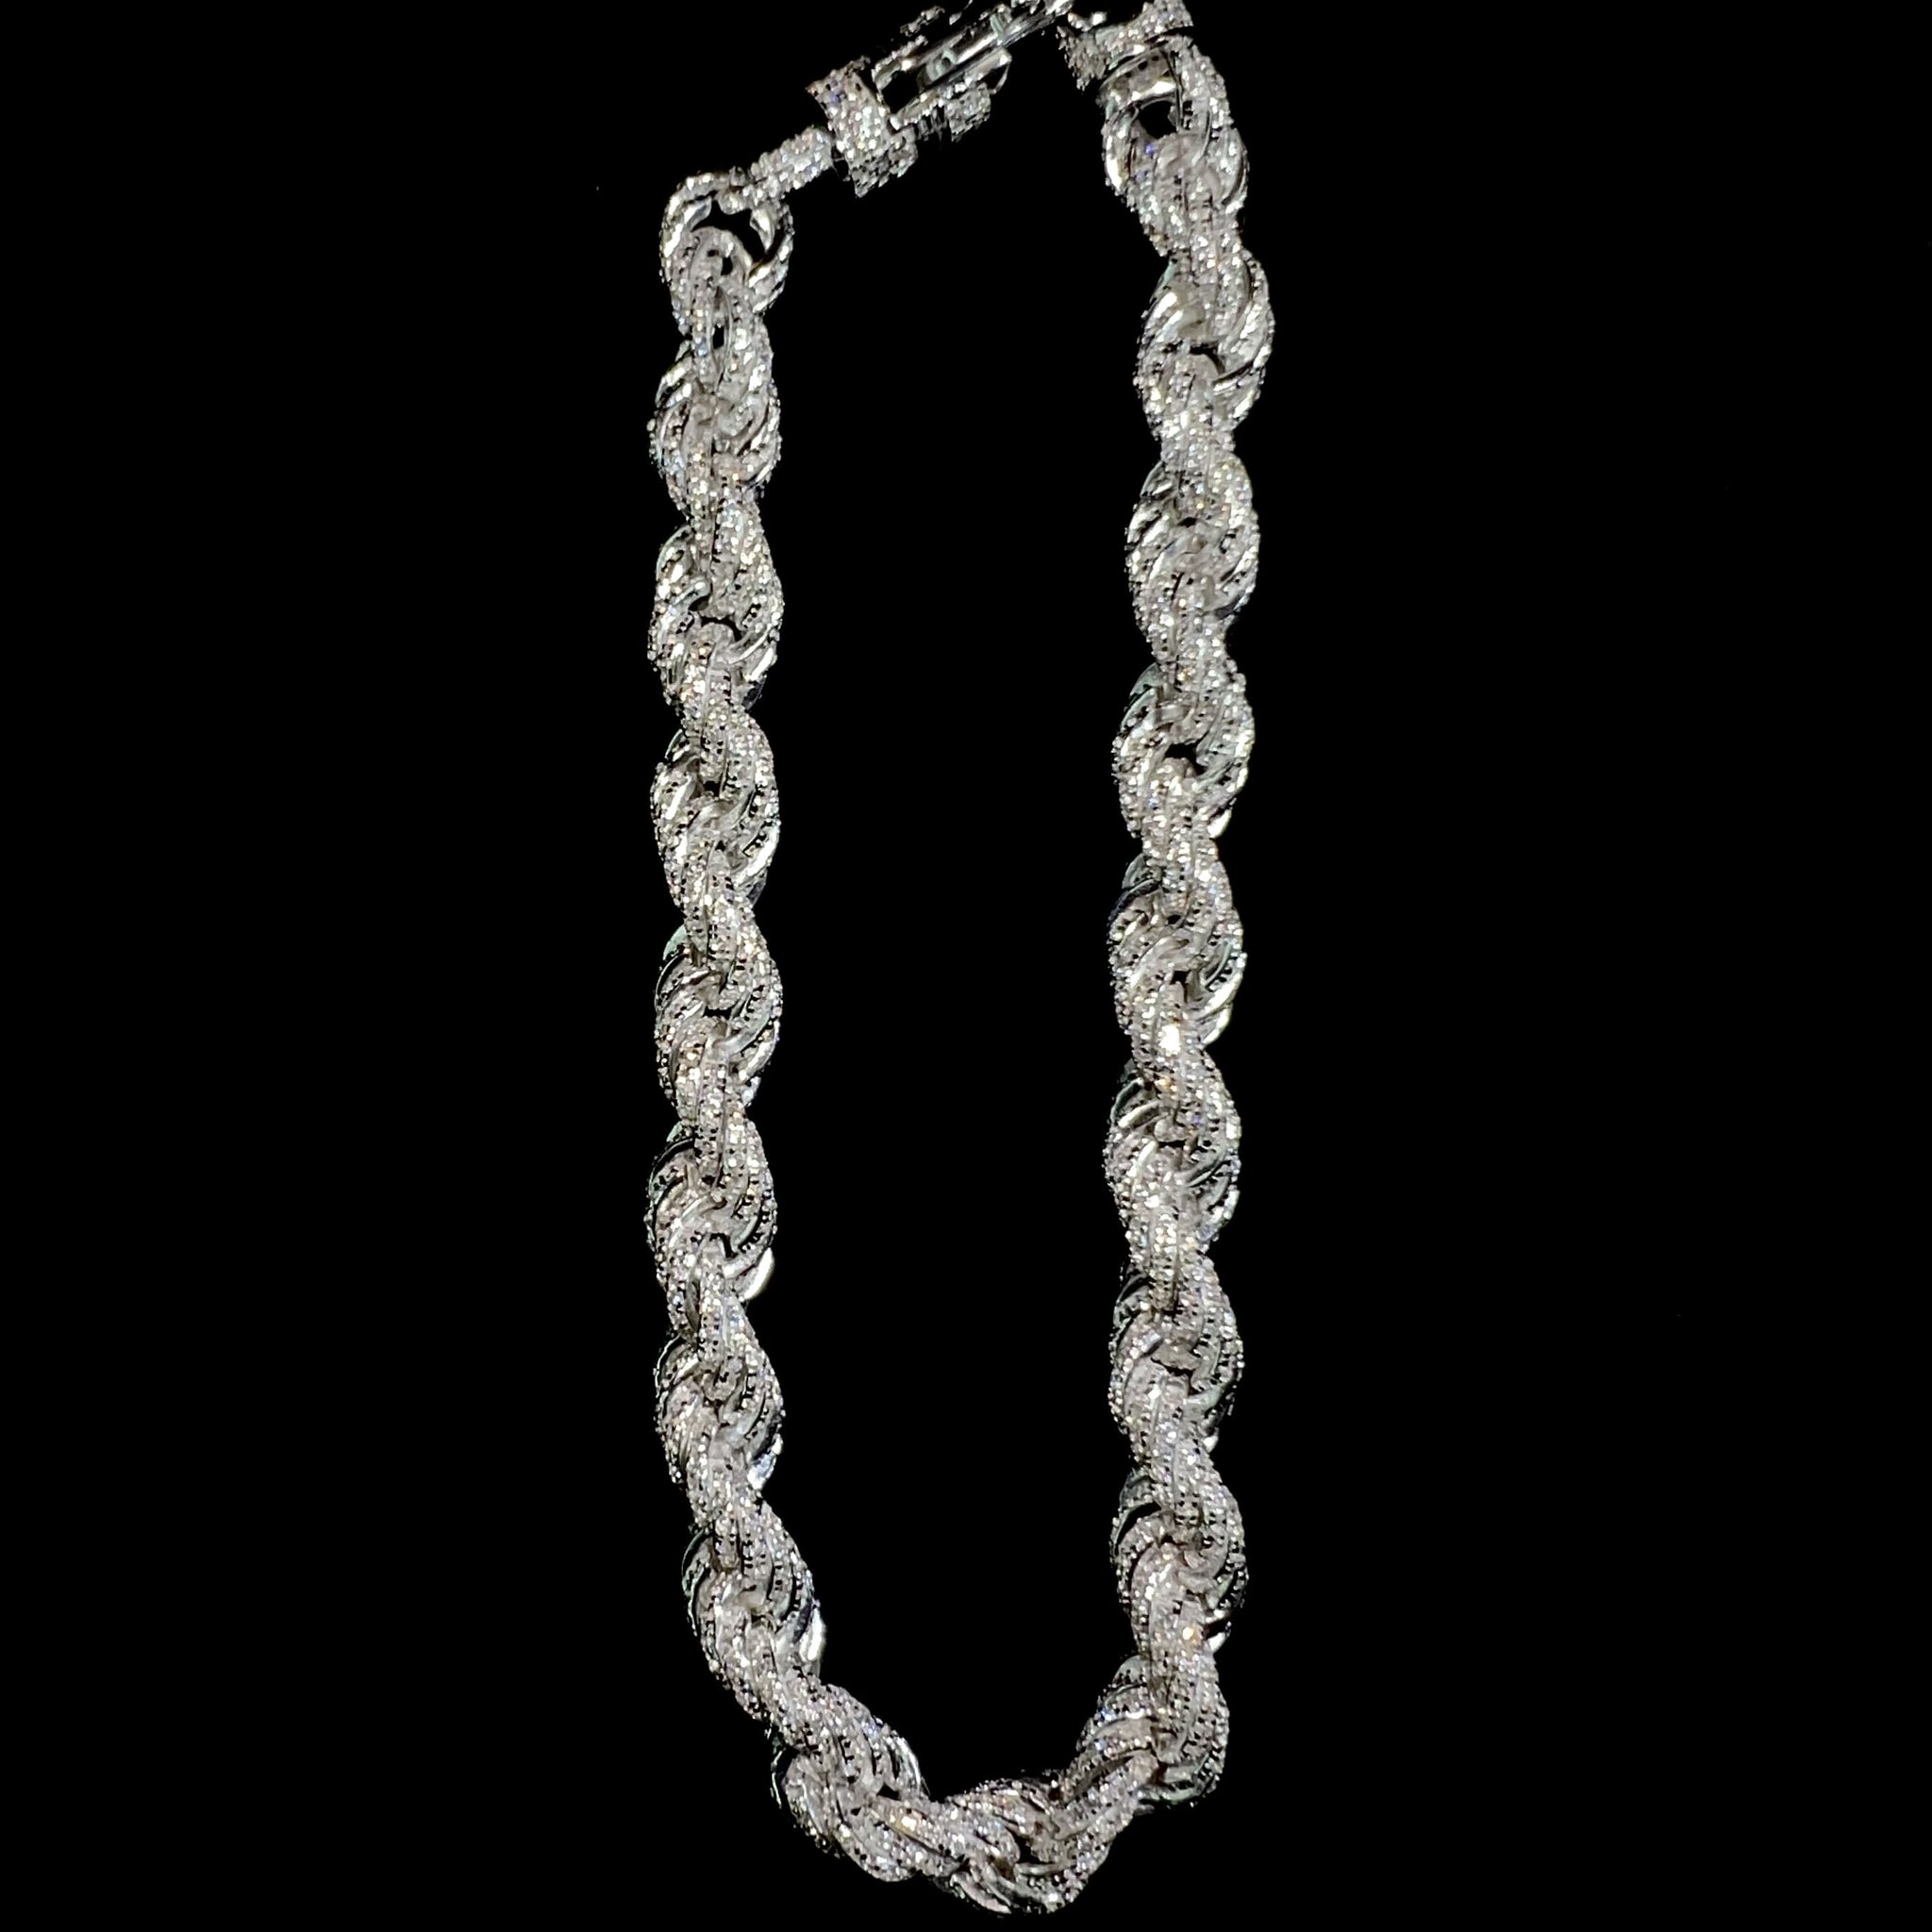 Iced Out Rope Bracelet - 7.5mm - Silver 925 - Sehgal Dubai Collection